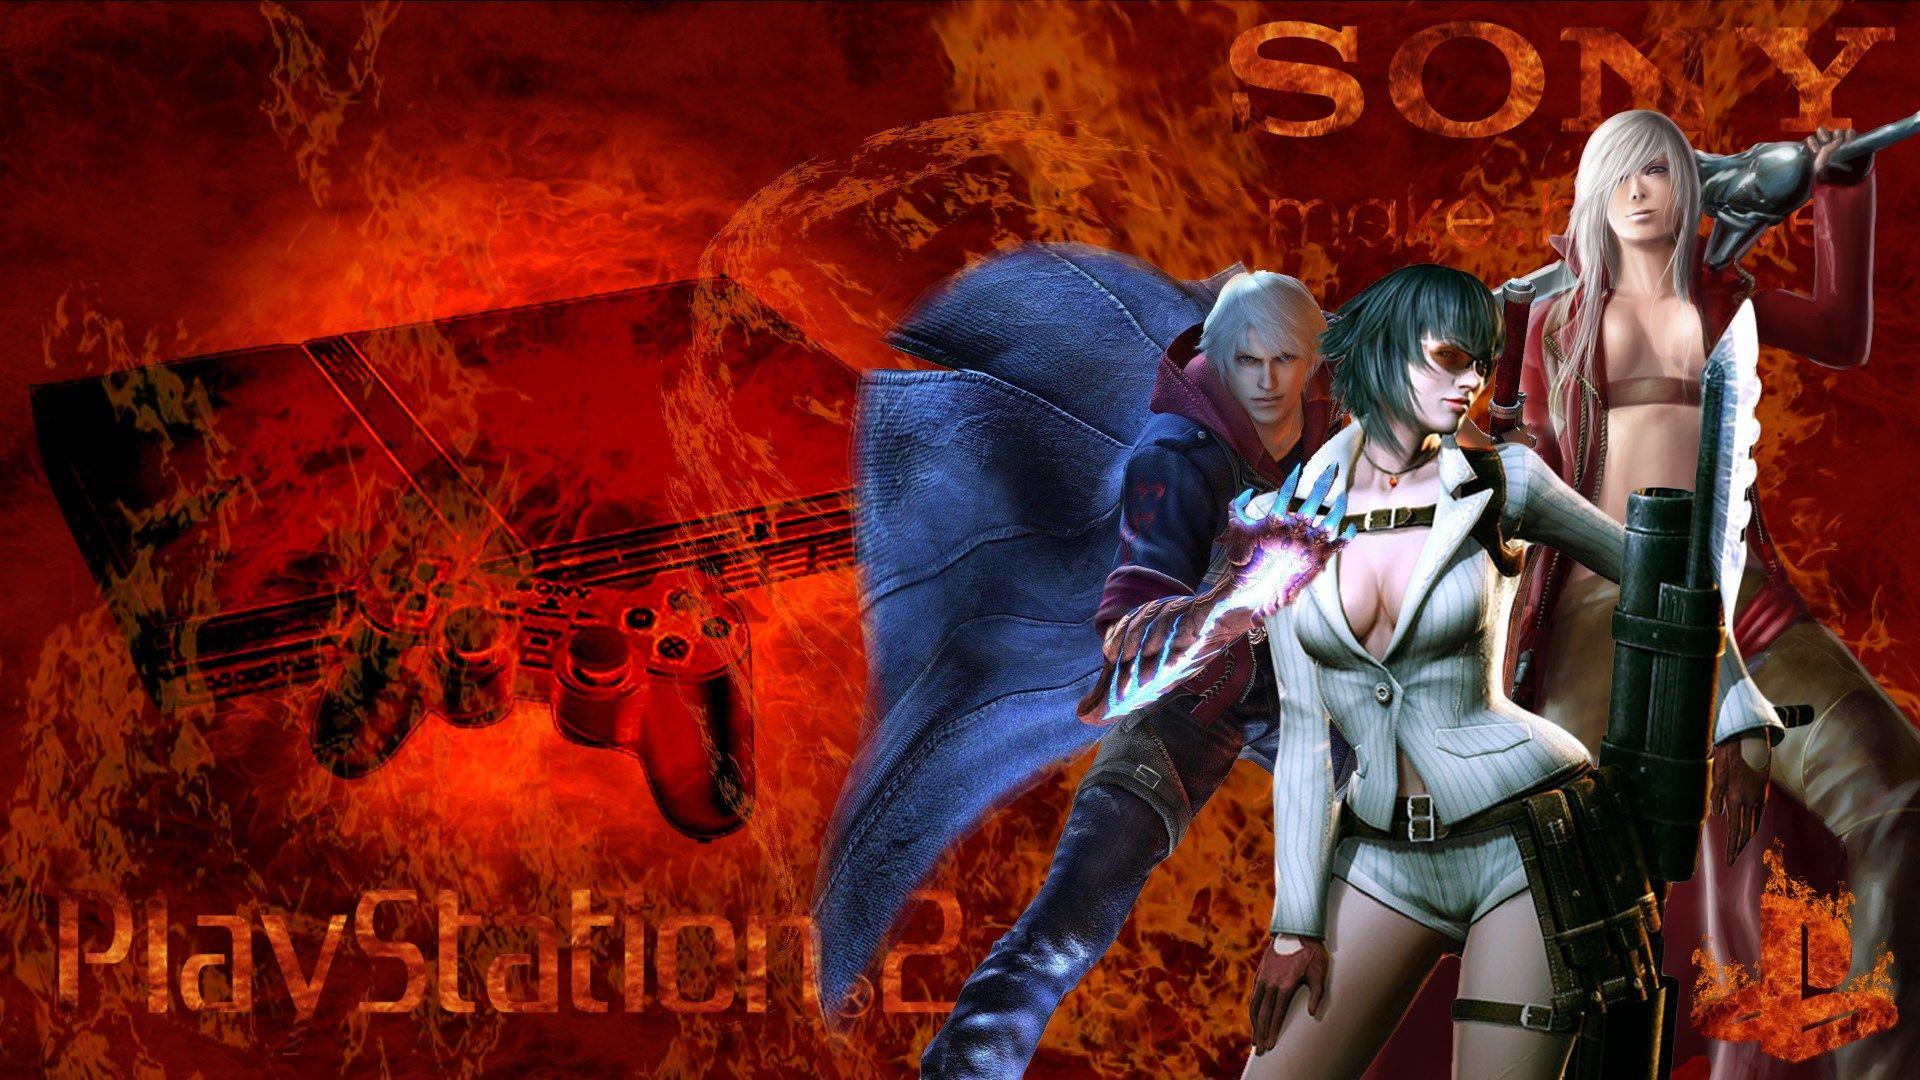 Devil May Cry 3 Wallpapers HD - Wallpaper Cave Vergil Devil May Cry 3 Wallpaper